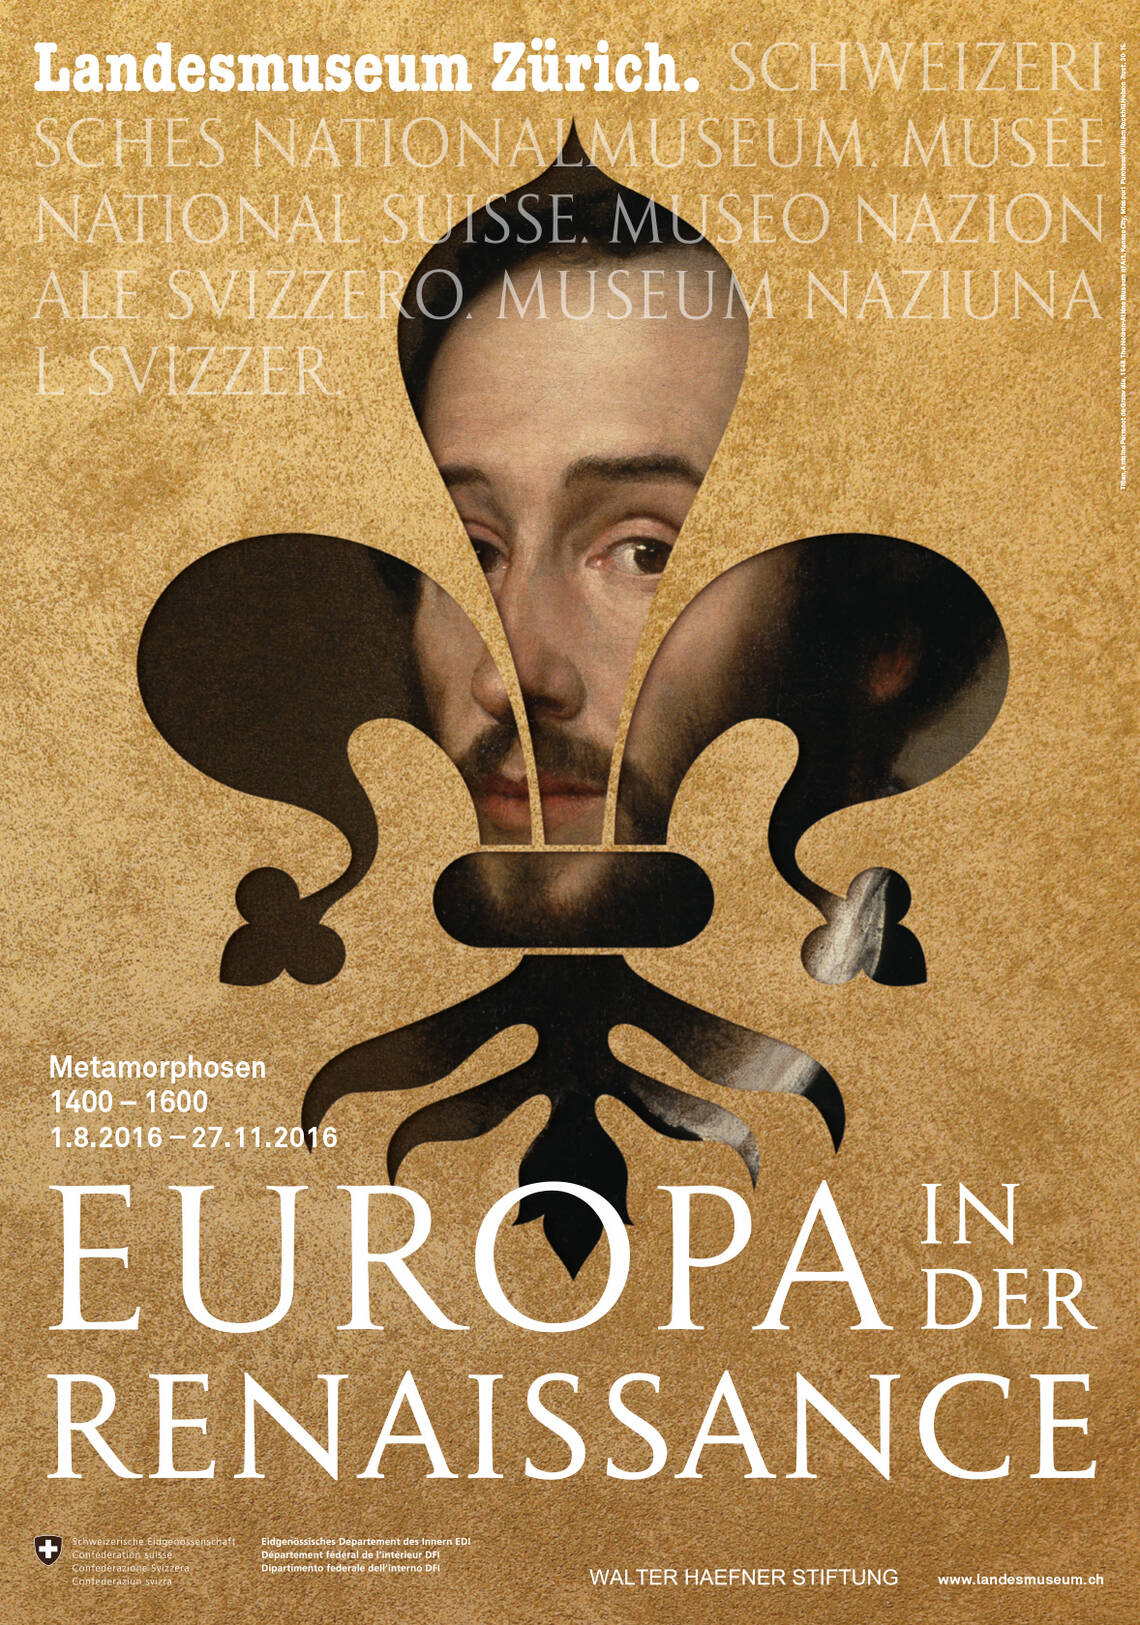 Poster of the exhibition "Renaissance in Europe